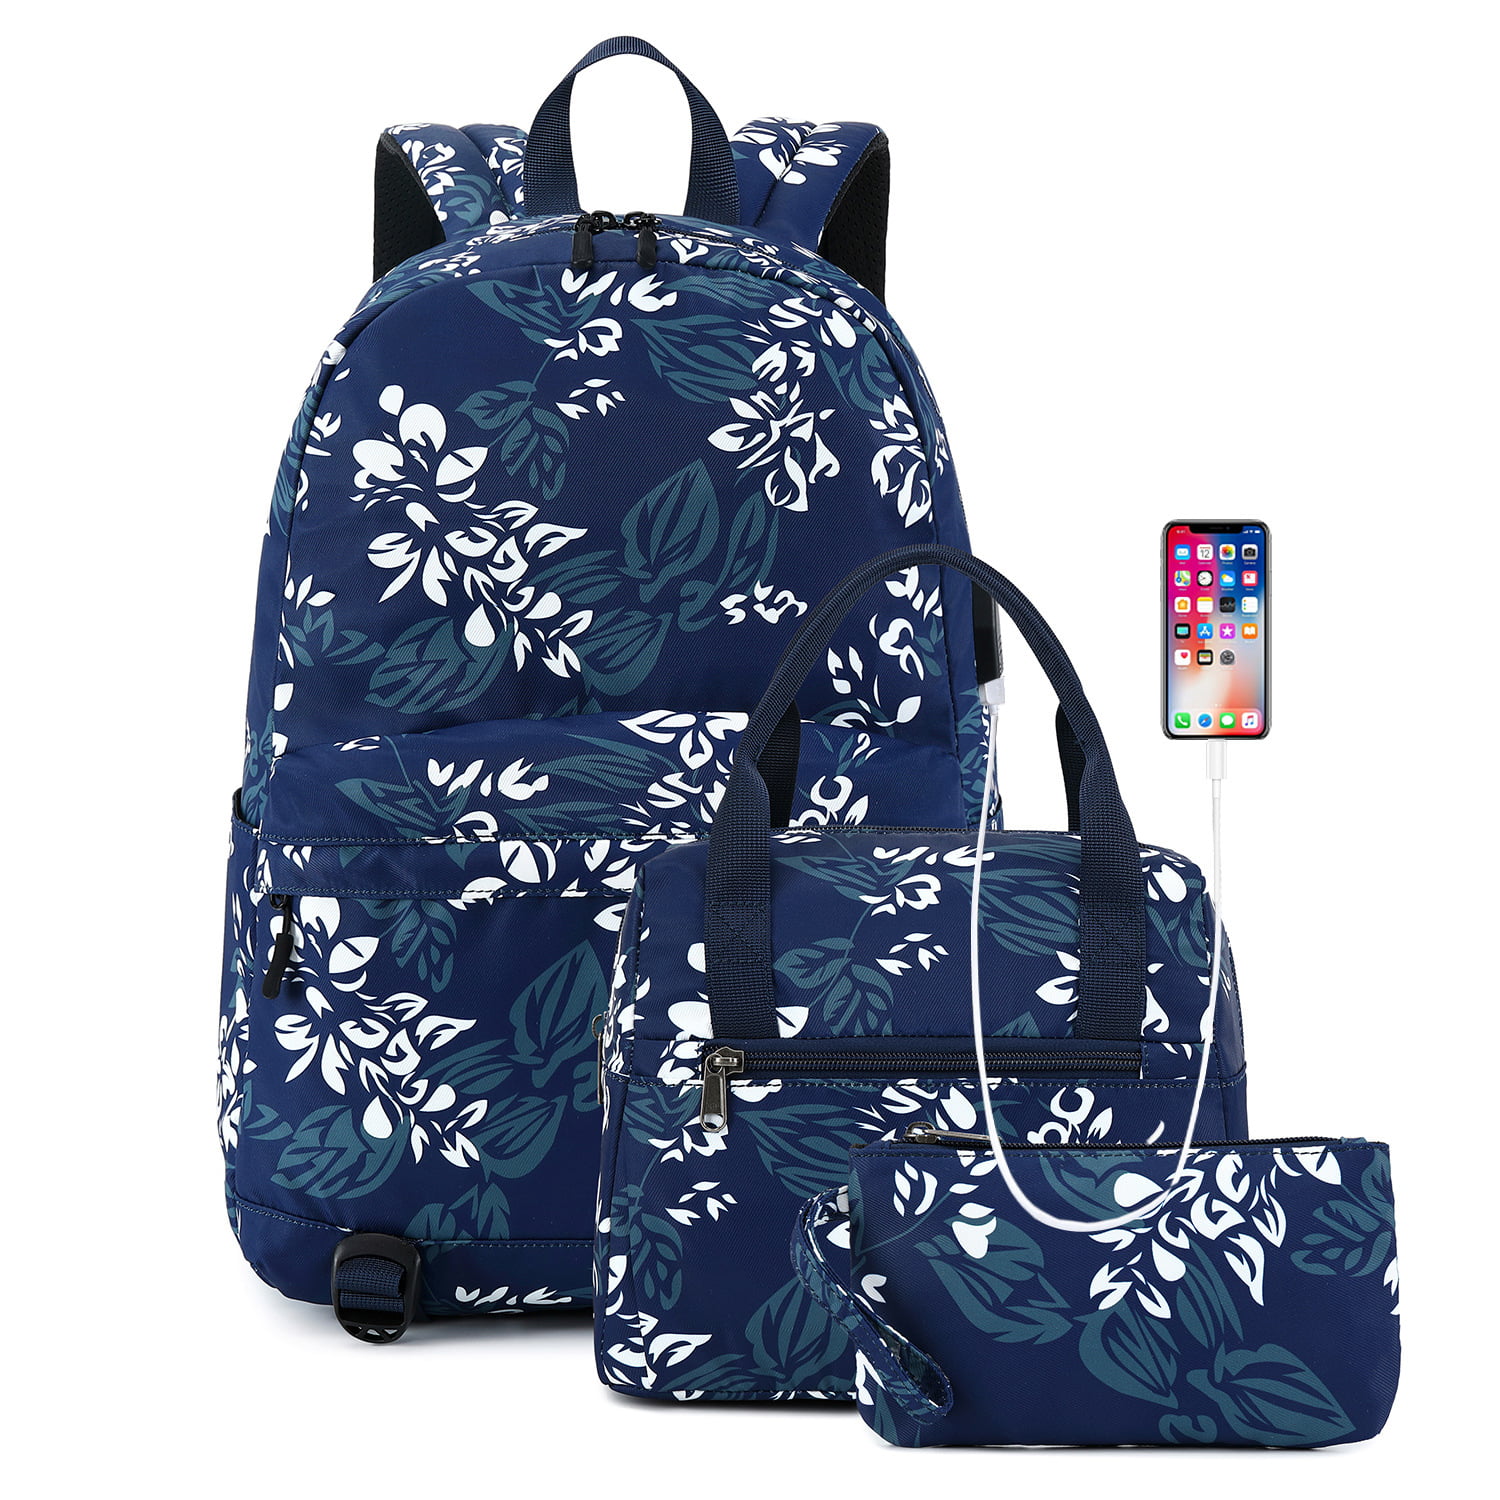 Tropical Flower Women's Travel Outdoor Canvas Backpack Large Size Padded Strap 